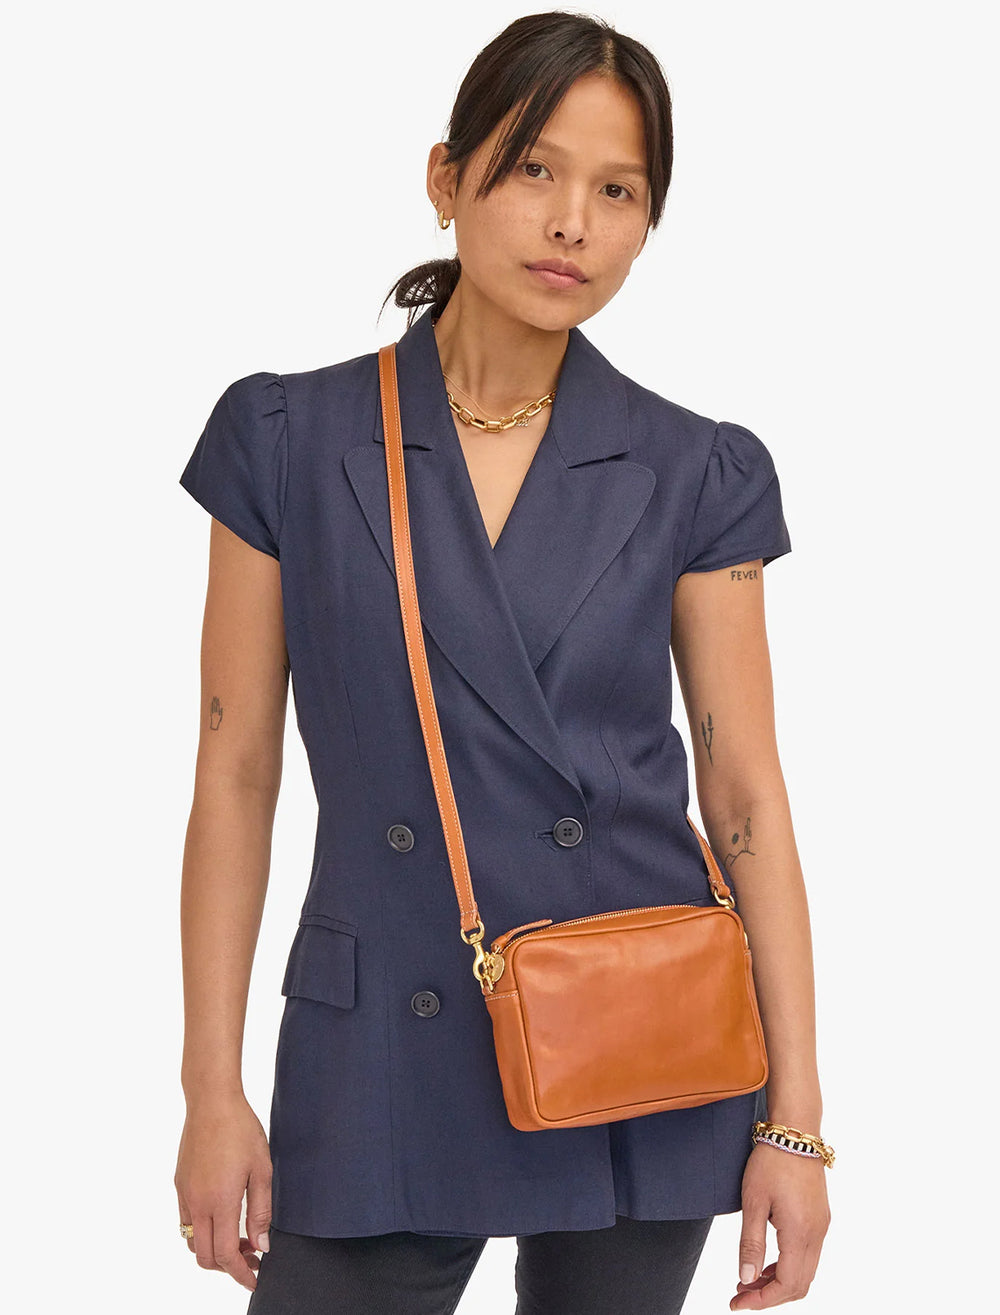 Model wearing Clare V.'s midi sac in tan nepetto as a crossbody.